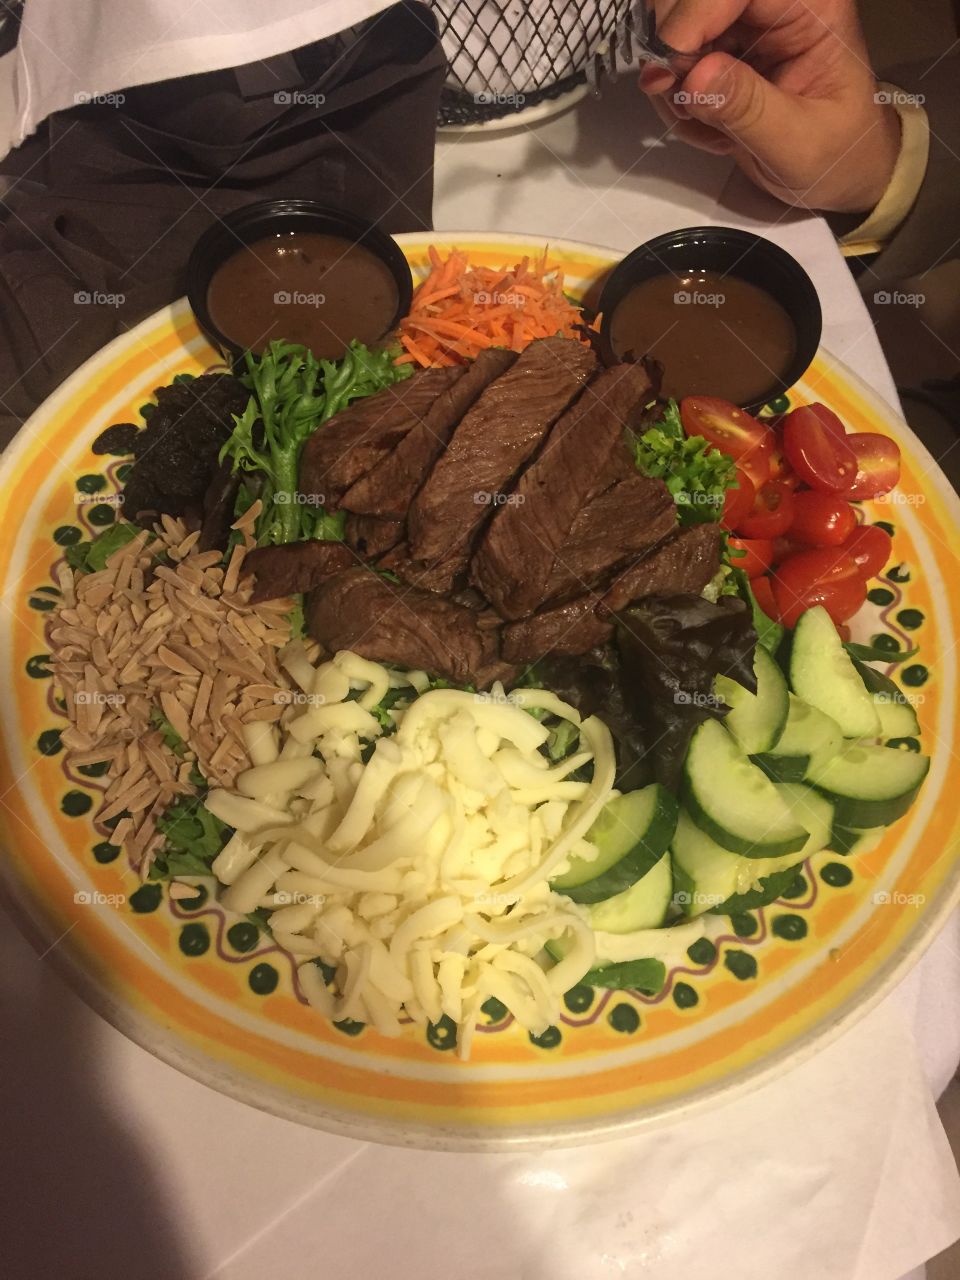 Colorful, beautifully artistically placed plate of food. Fresh and well prepared steak salad